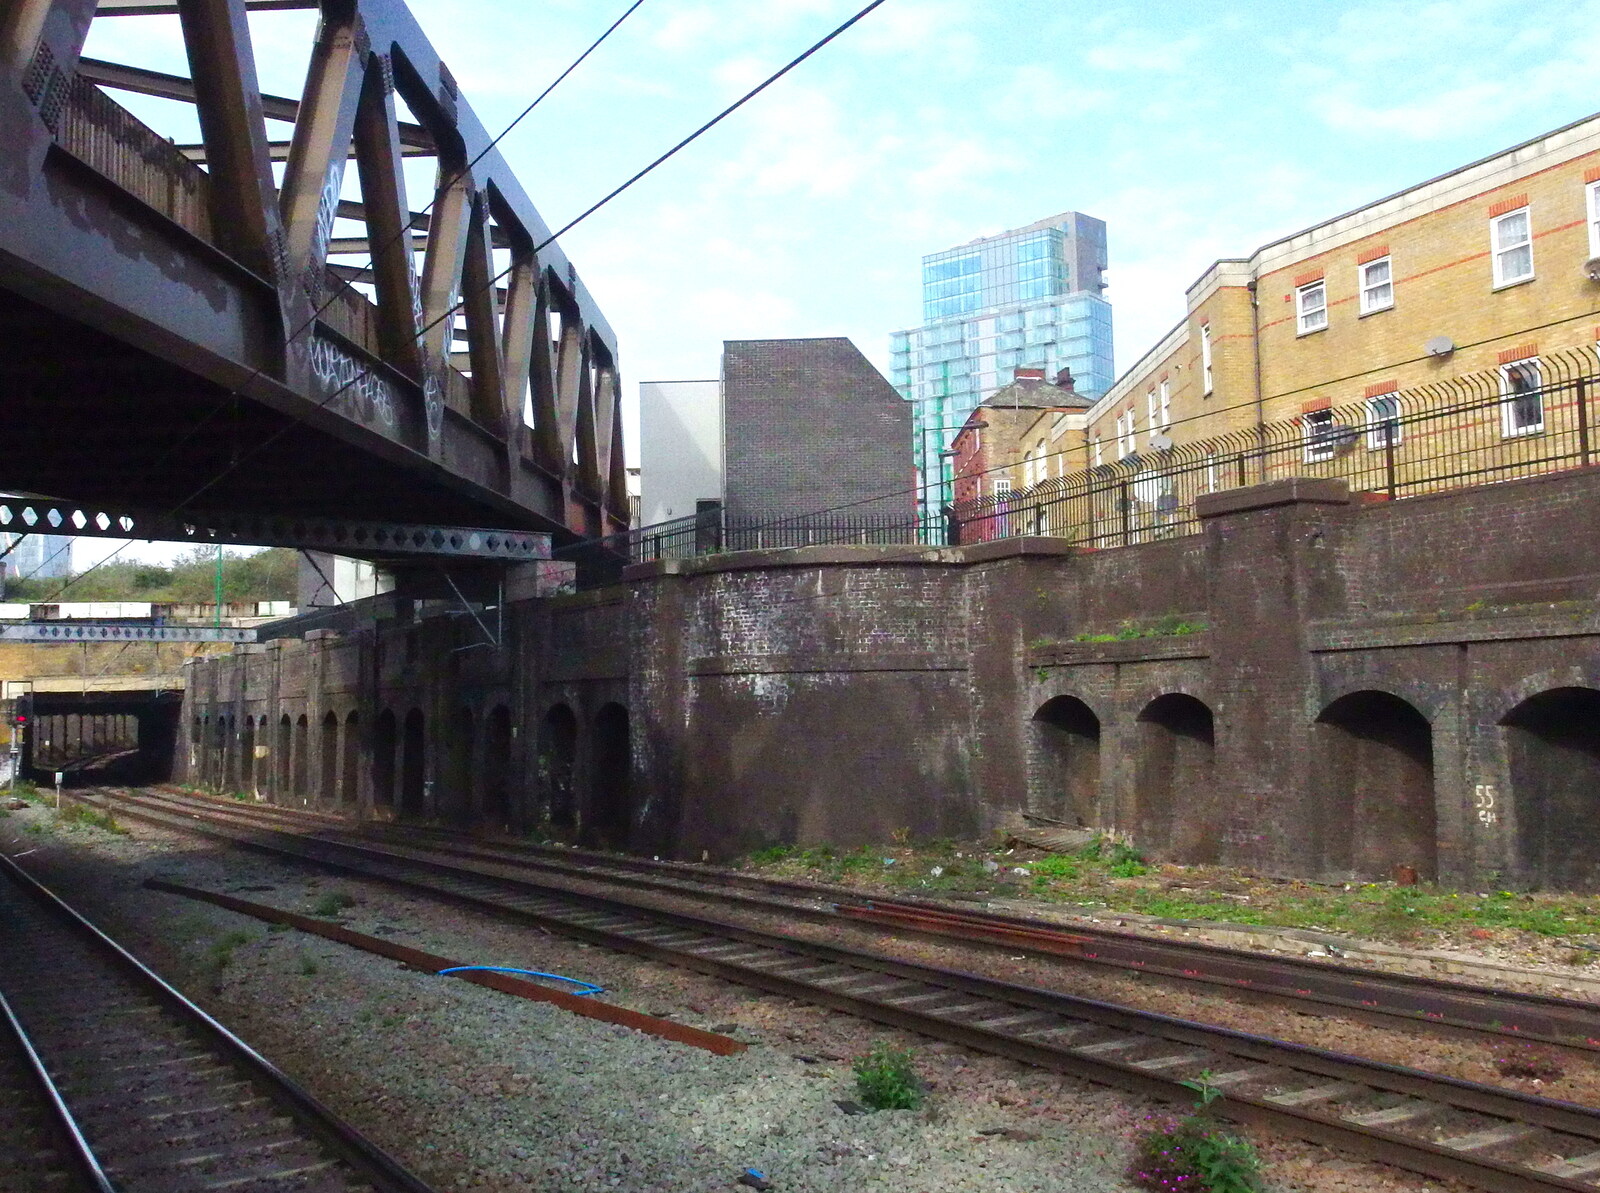 A bridge over the railway from A Trainey Sort of Week, Liverpool Street, City of London - 3rd April 2014